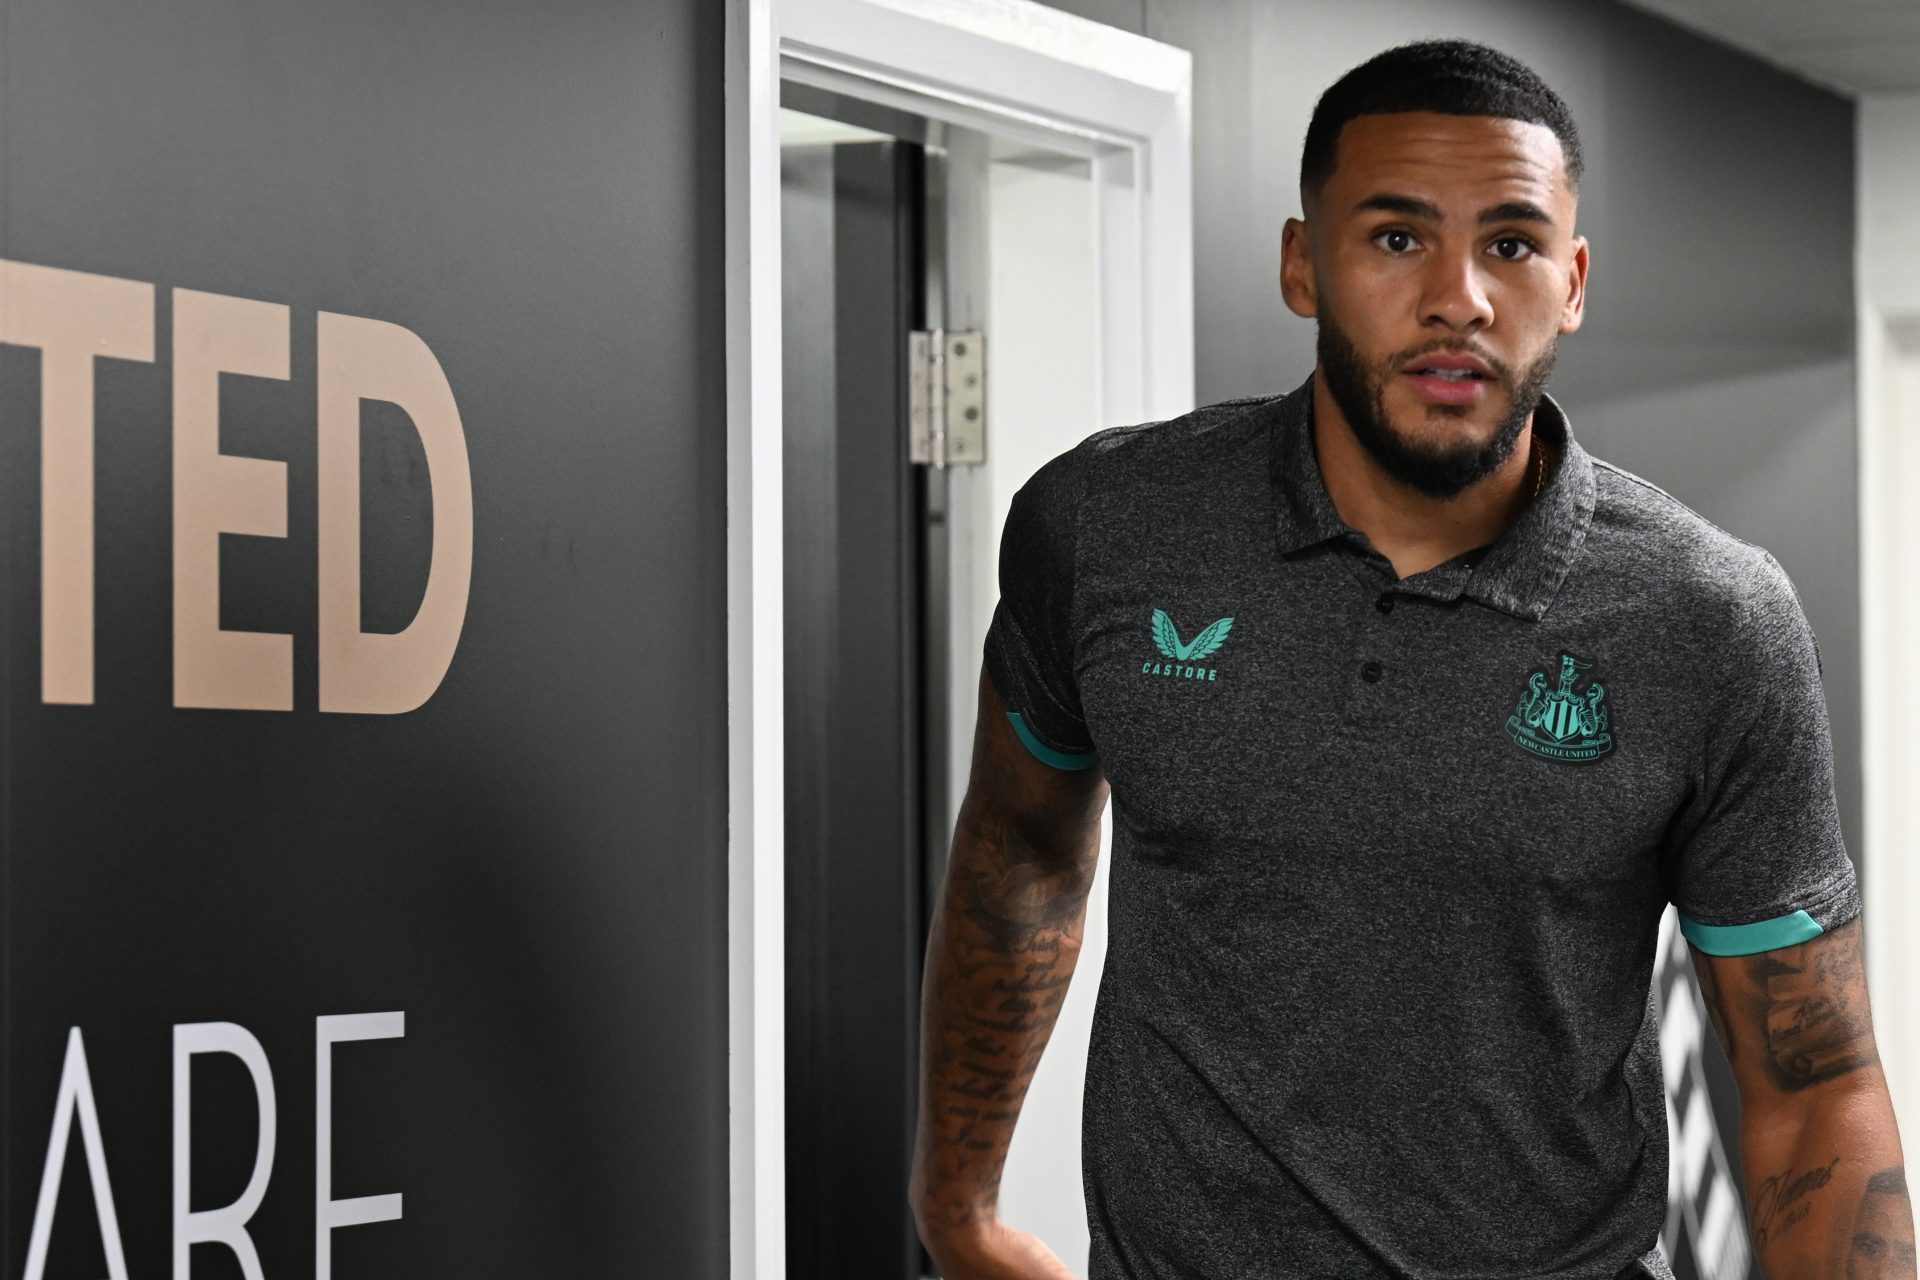 Newcastle captain Jamaal Lascelles attacked in violent street brawl